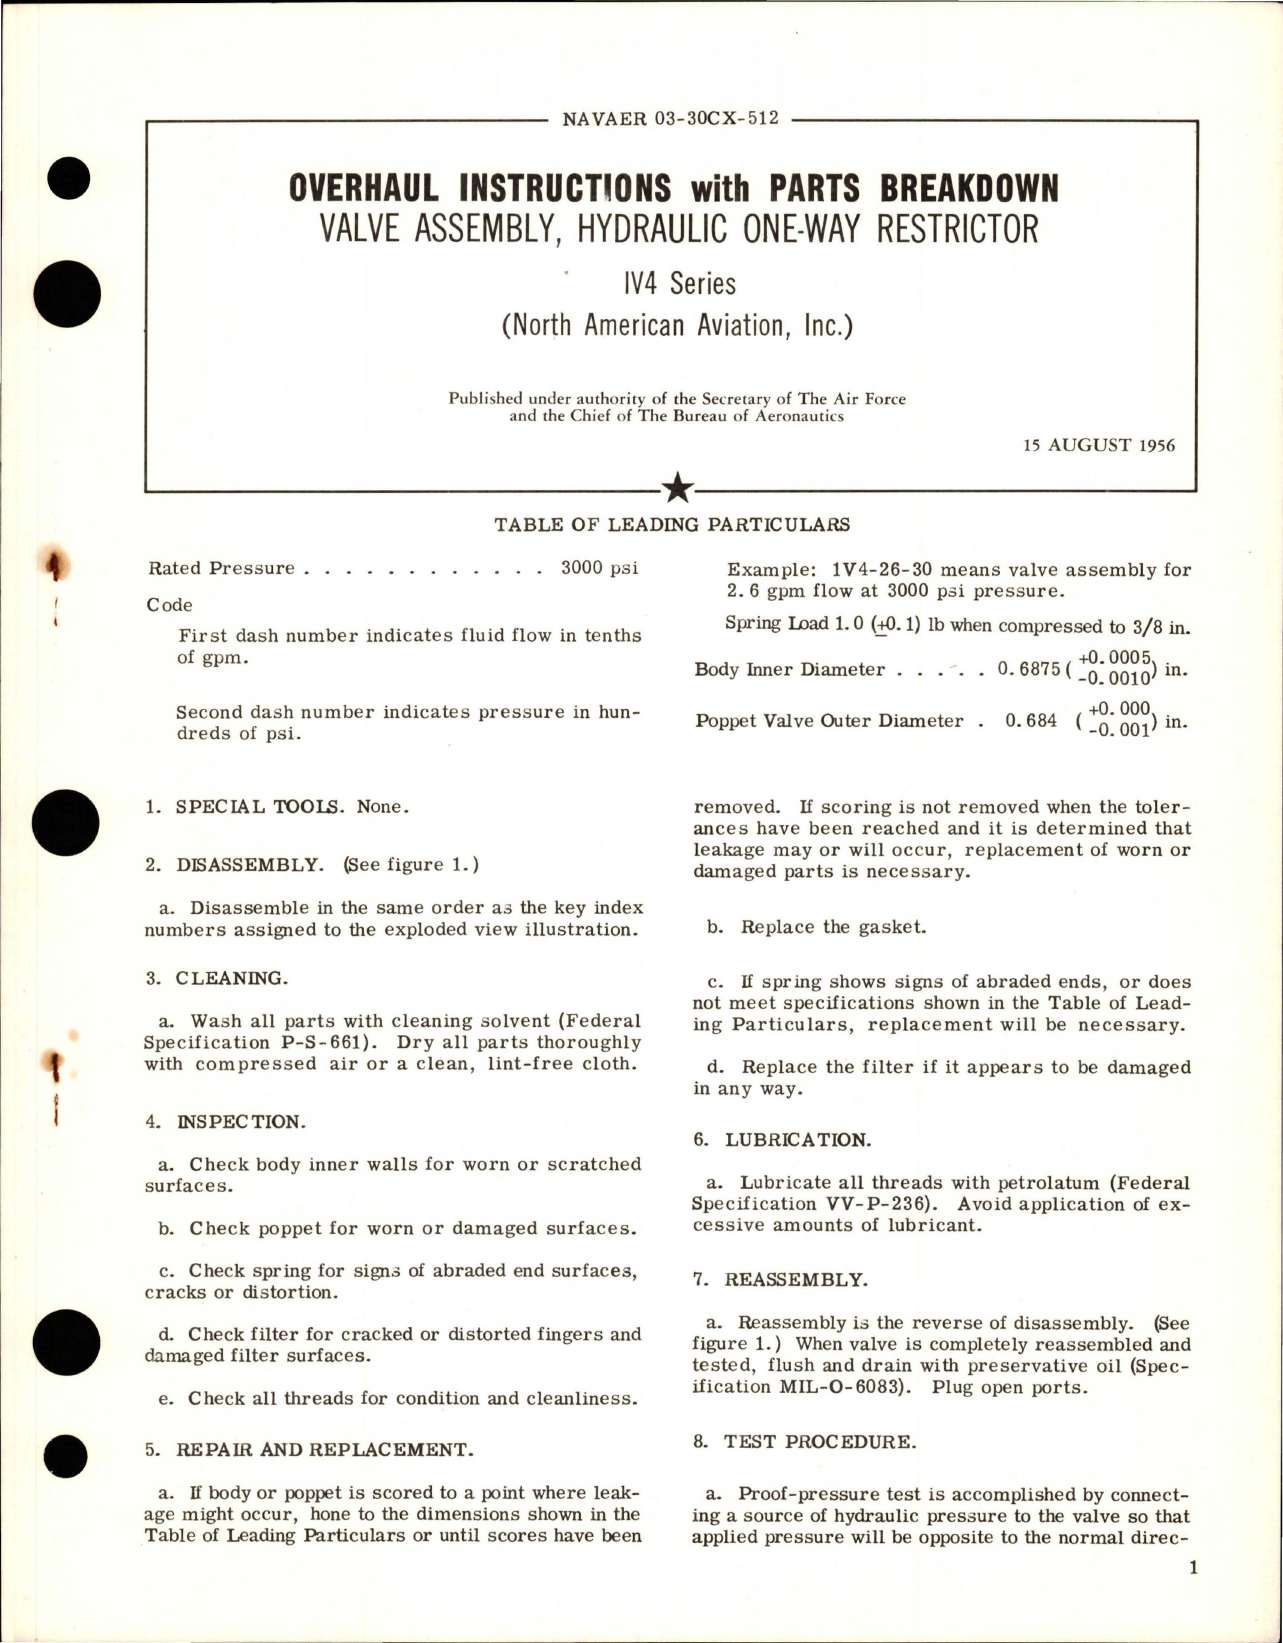 Sample page 1 from AirCorps Library document: Overhaul Instructions with Parts Breakdown for Hydraulic One Way Restrictor Valve Assy - IV4 Series 